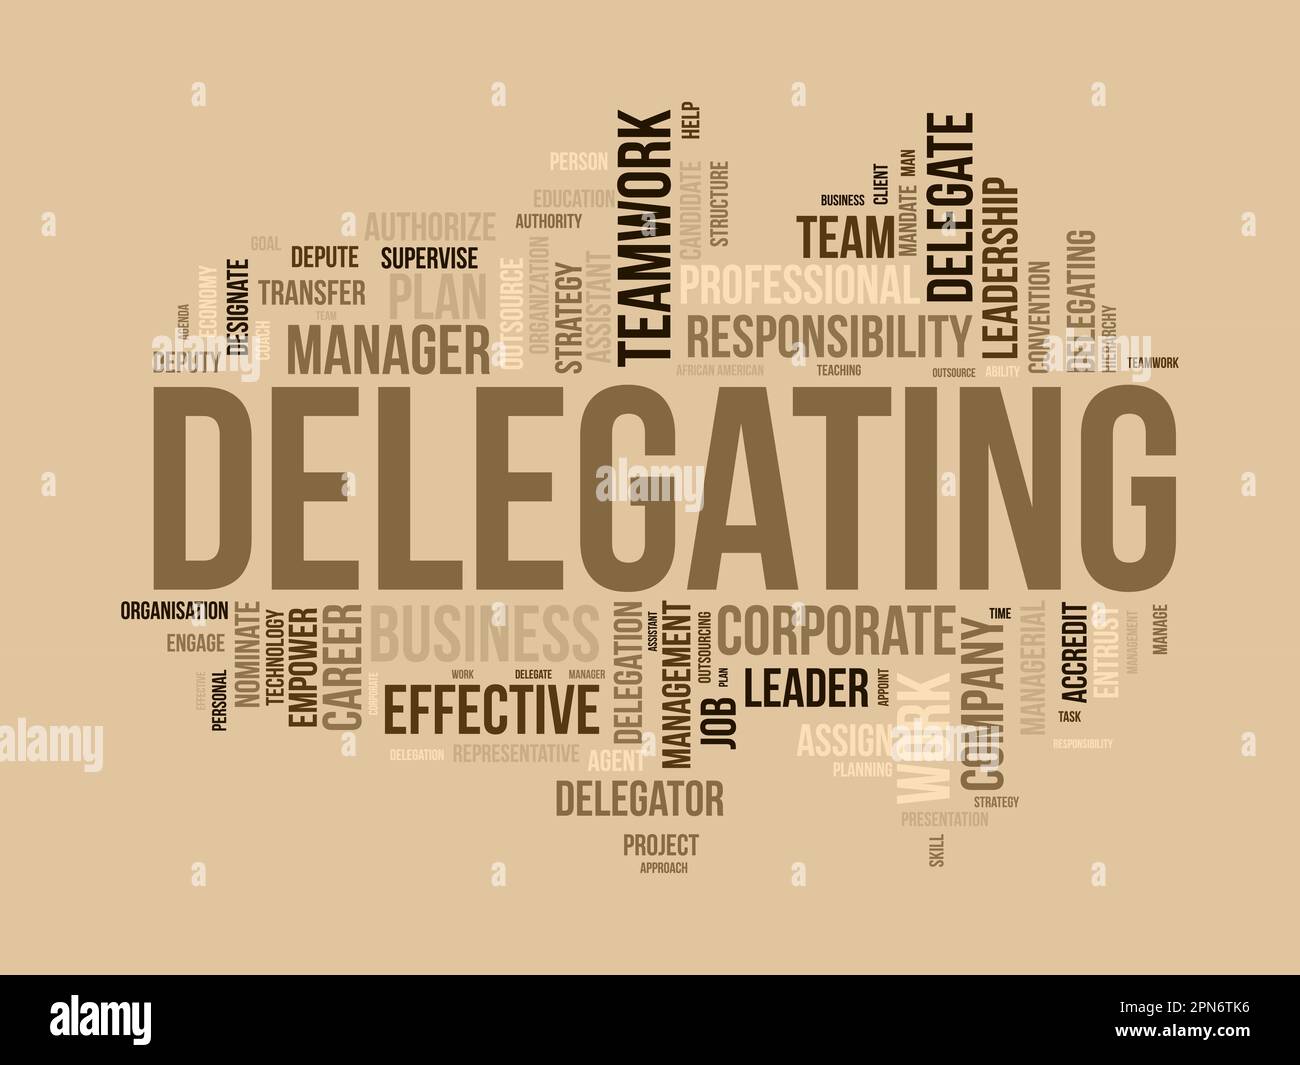 Word cloud background concept for Delegating. Business responsibility, career management assign of strategic leadership approach. vector illustration. Stock Vector